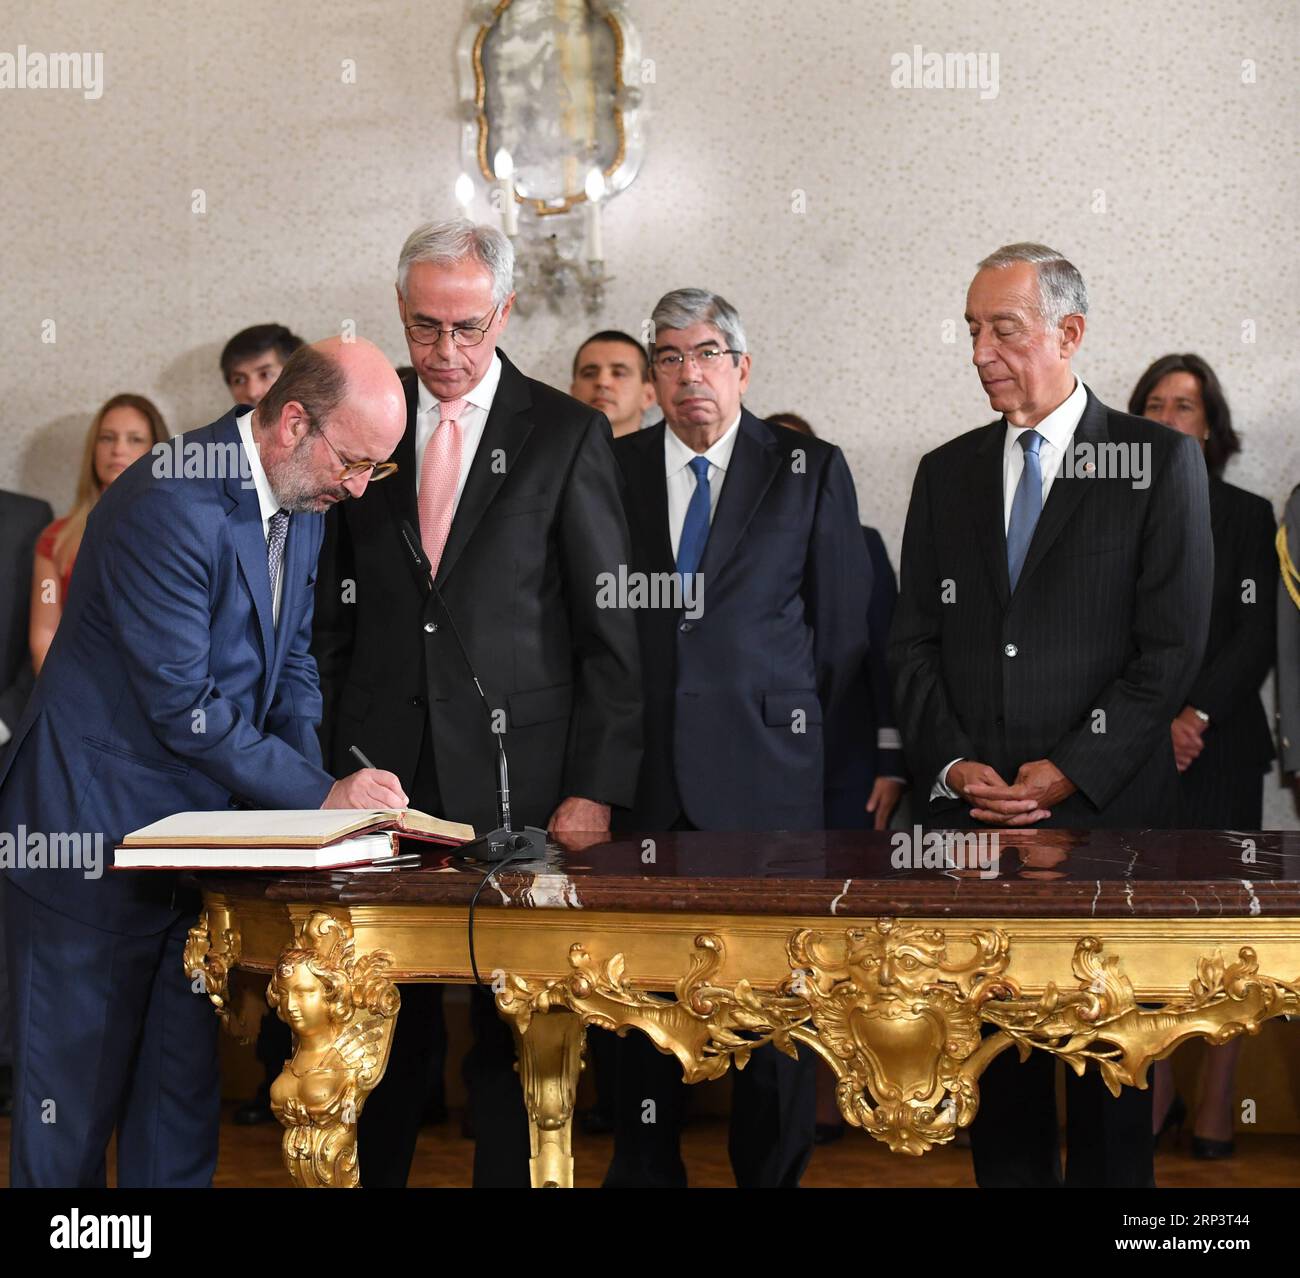 (181015) -- LISBON, Oct. 15, 2018 -- Newly appointed Portuguese Environment and Energy Transition Minister Joao Matos Fernandes (1st L) attends a swearing-in ceremony of new ministers in Lisbon, Portugal, on Oct. 15, 2018. ) (hy) PORTUGAL-LISBON-CABINET-RESHUFFLE ZhangxLiyun PUBLICATIONxNOTxINxCHN Stock Photo